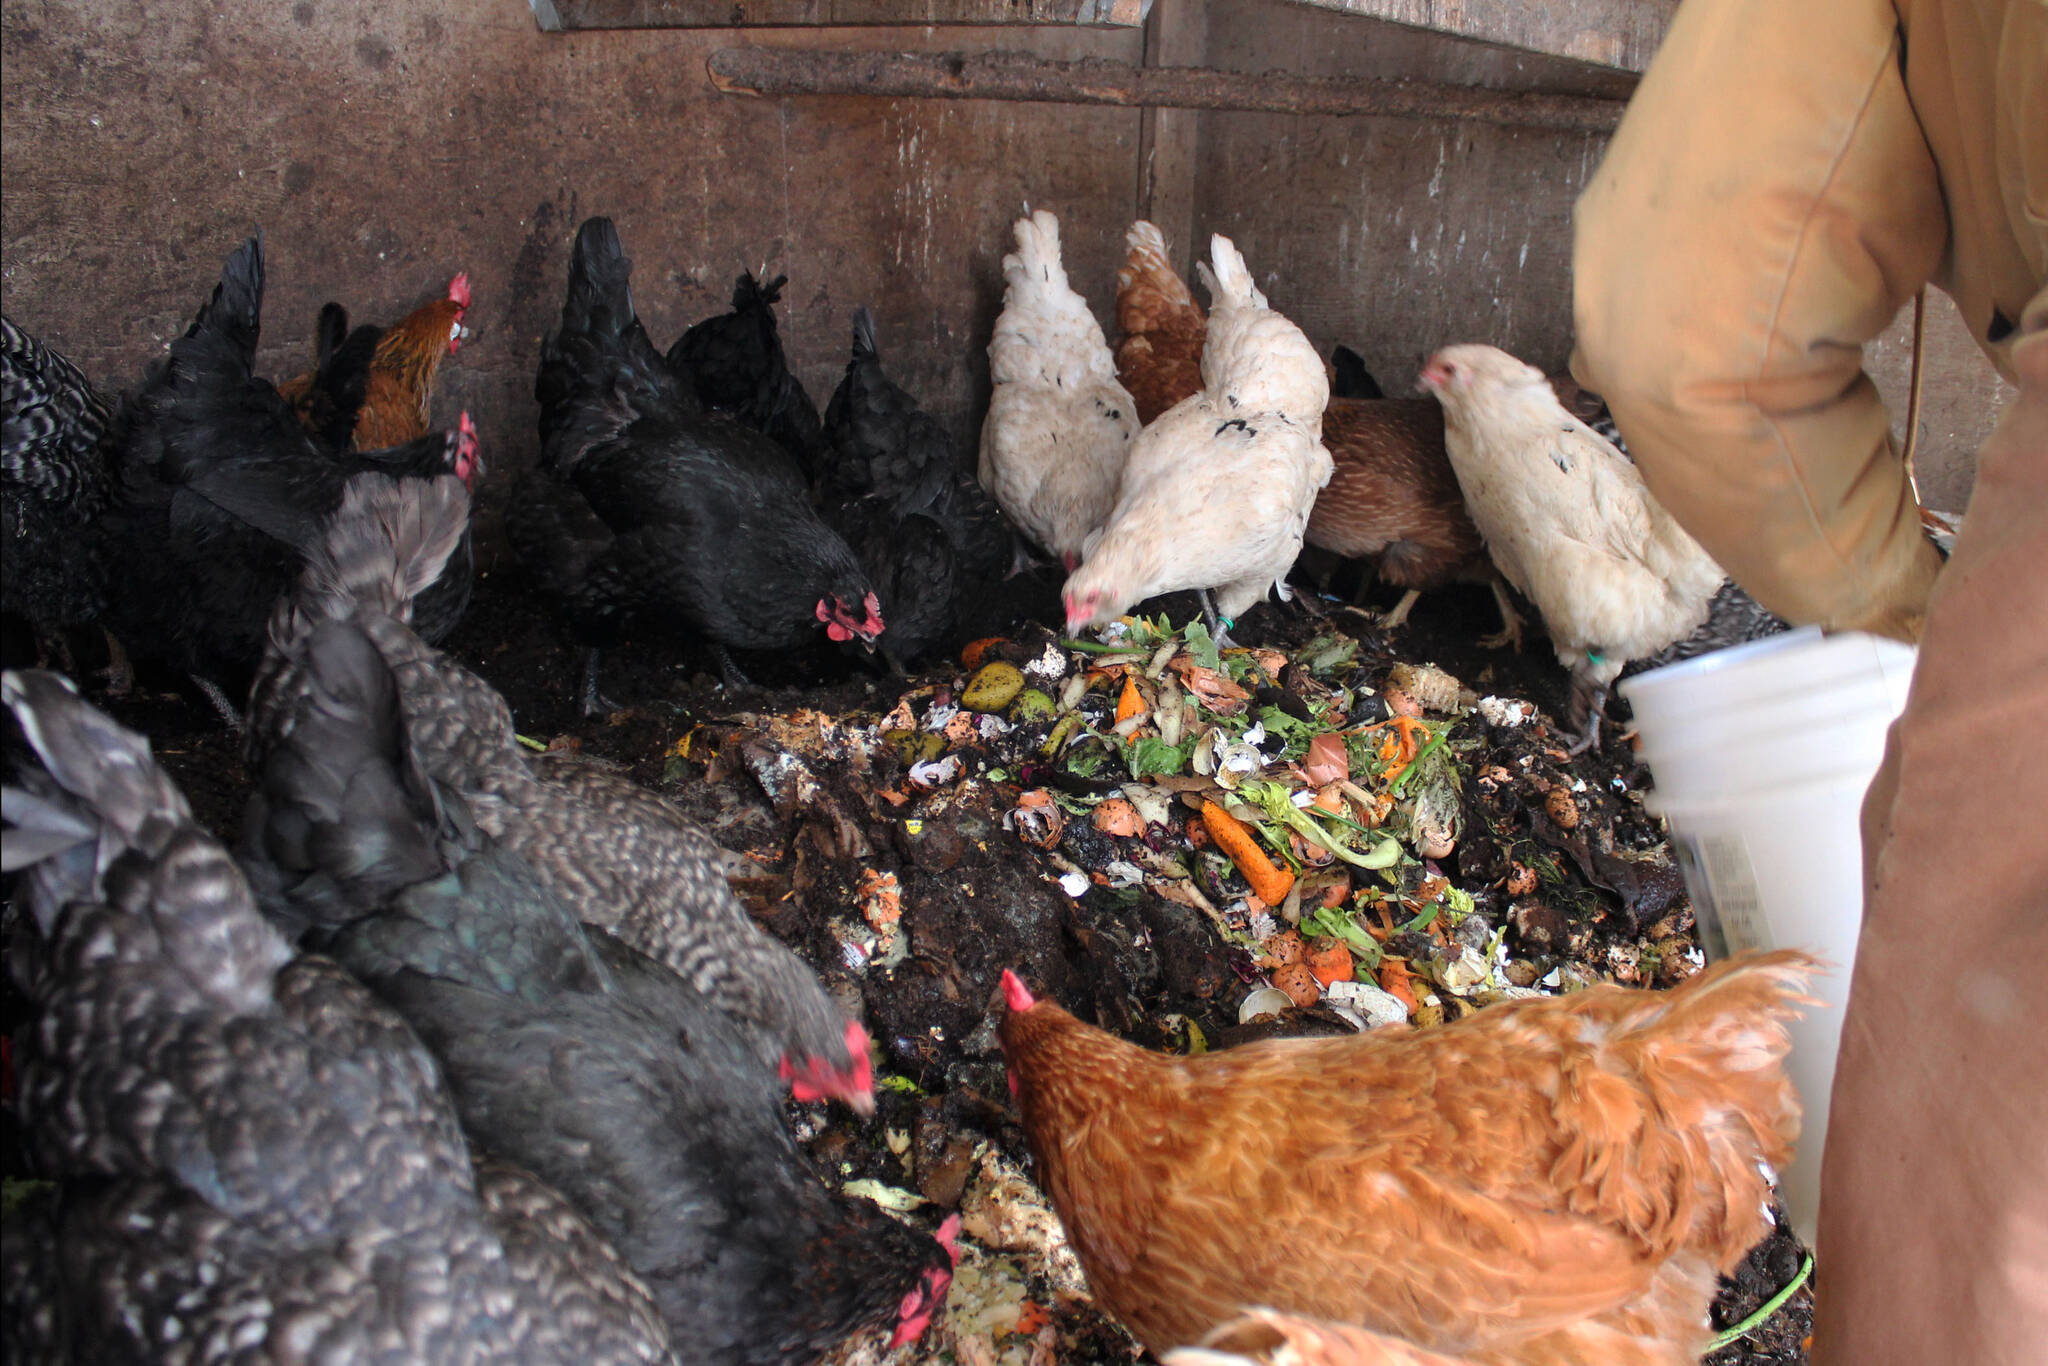 Chickens eat compost inside of a chicken house at Diamond M Ranch on Thursday, April 1, 2021, off Kalifornsky Beach Road near Kenai, Alaska. The ranch receives food scraps from the public as part a community program aimed at recovering food waste and keeping compostable material out of the landfill. (Ashlyn O’Hara/Peninsula Clarion)